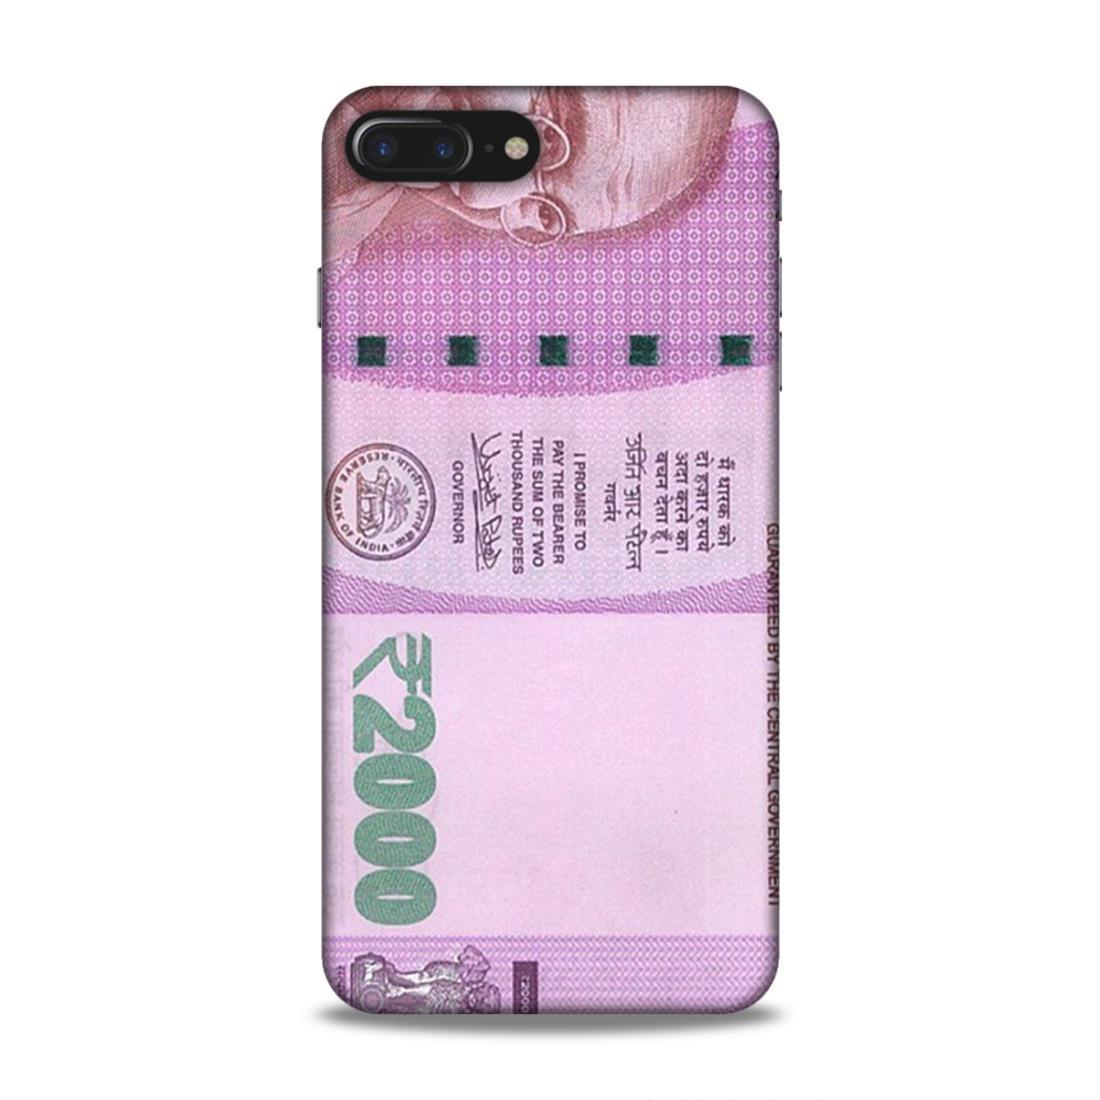 Rs 2000 Currency Note iPhone 8 Plus Phone Cover